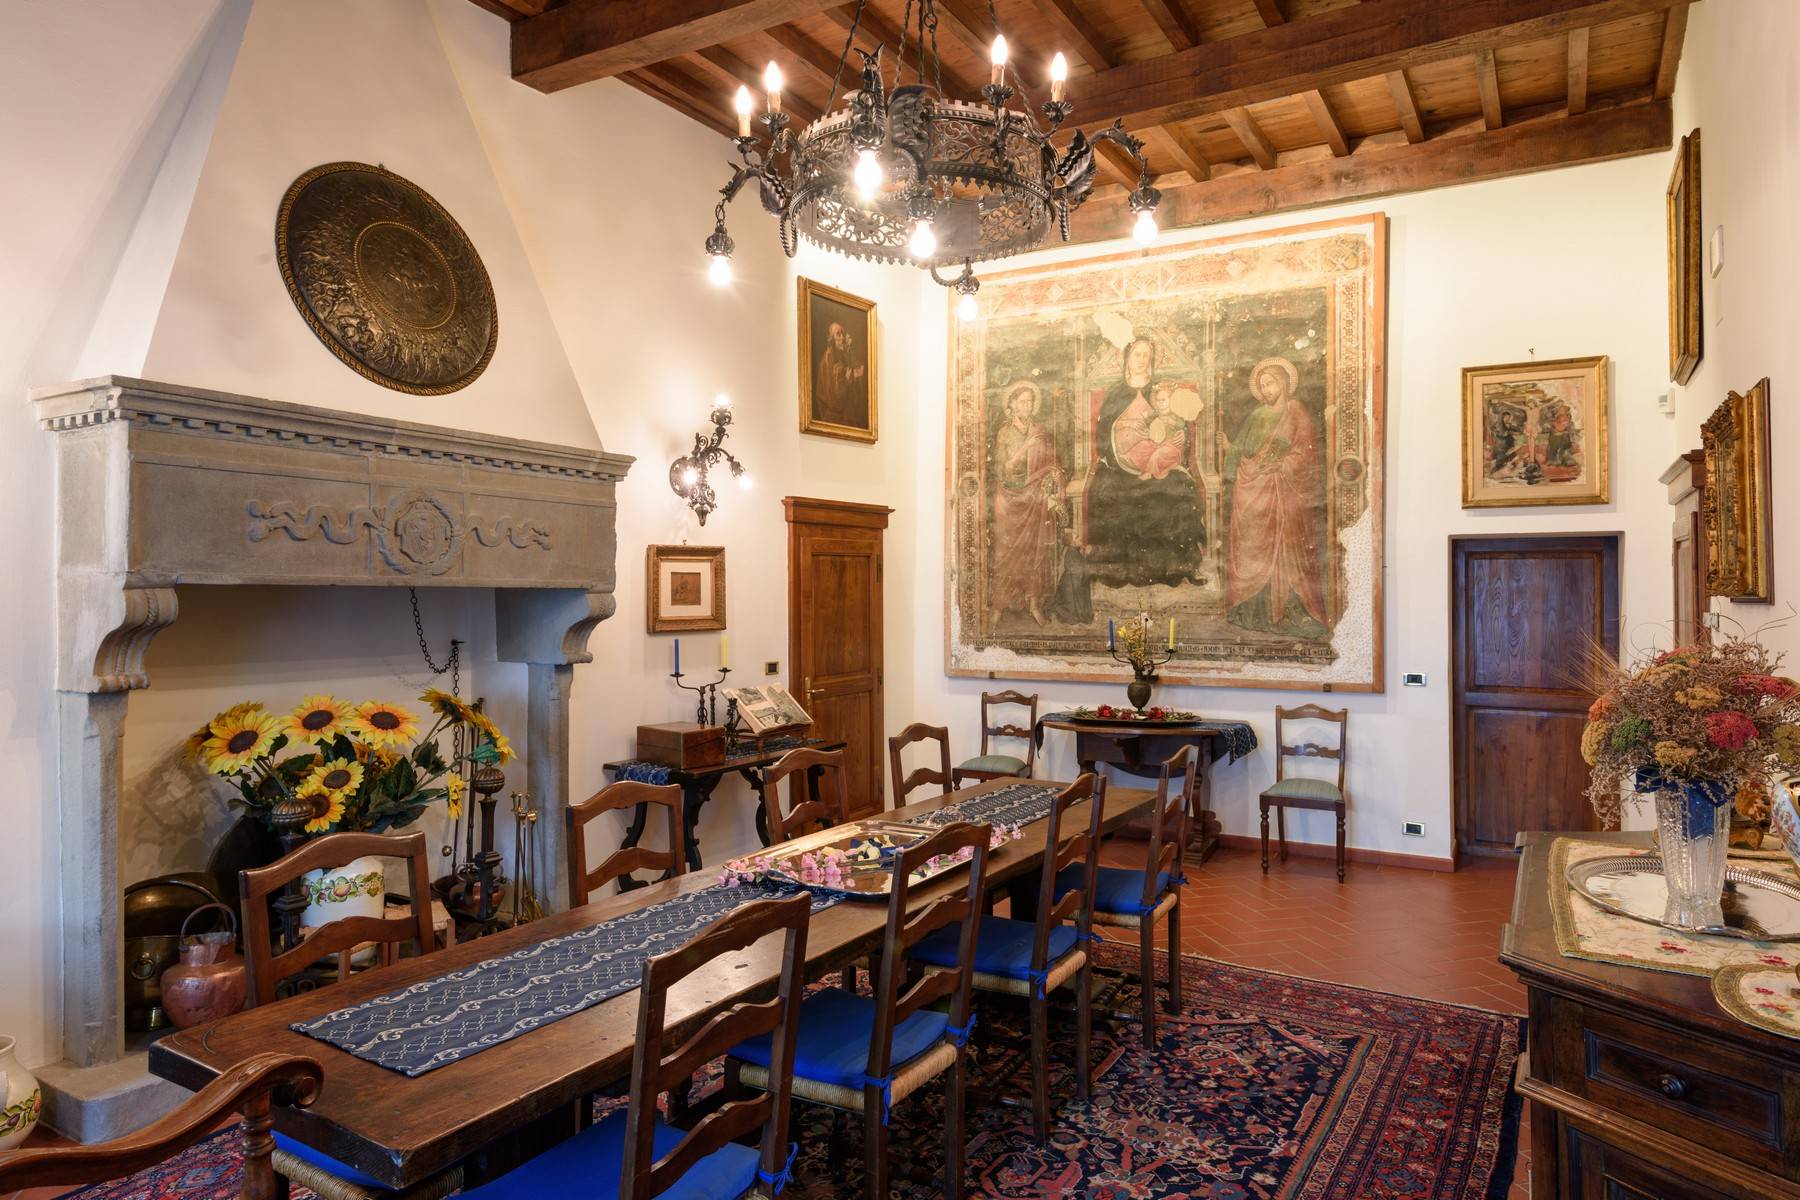 Historical palace of the 10th century in the heart of the Val di Chiana